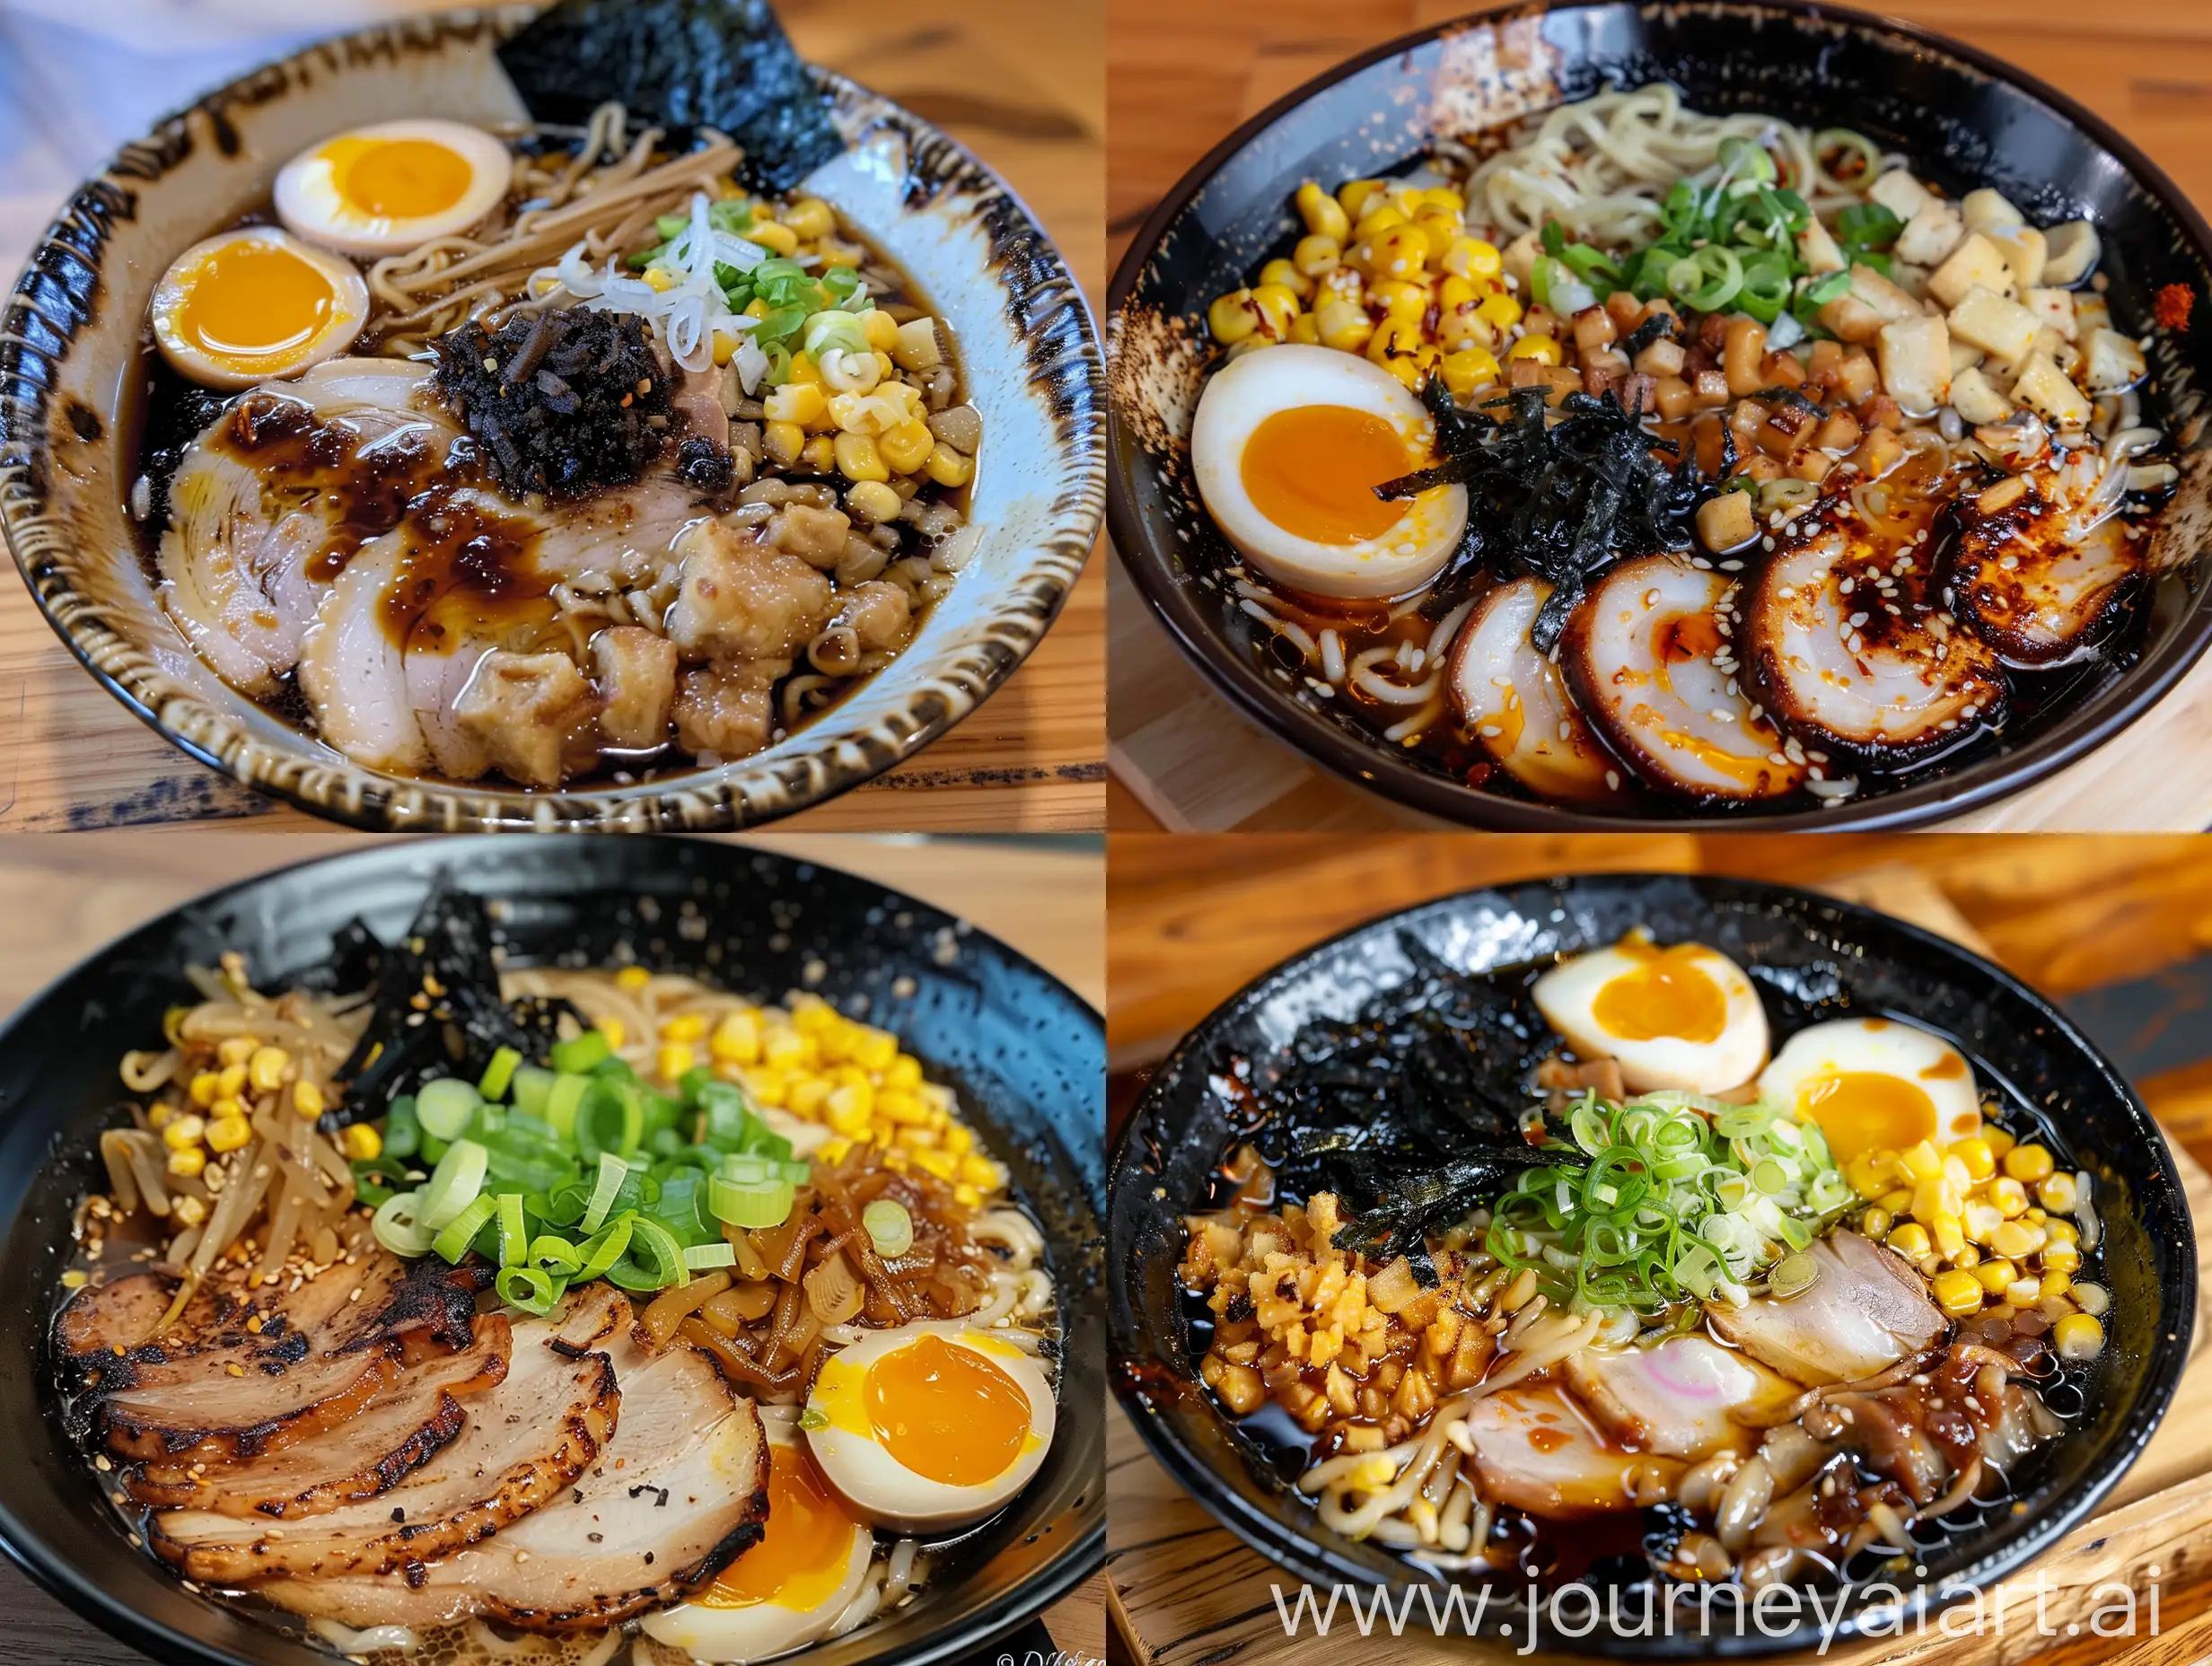 Black Garlic Oil Tonkotsu Ramen: Pork BBQ pork, bamboo shoots, fish cake, fungus, crushed fried onions, egg, spring onions, grilled seaweed on the side. Small Shanghainese: Pork barbecue, fungus, corn, loose egg, spring onion.